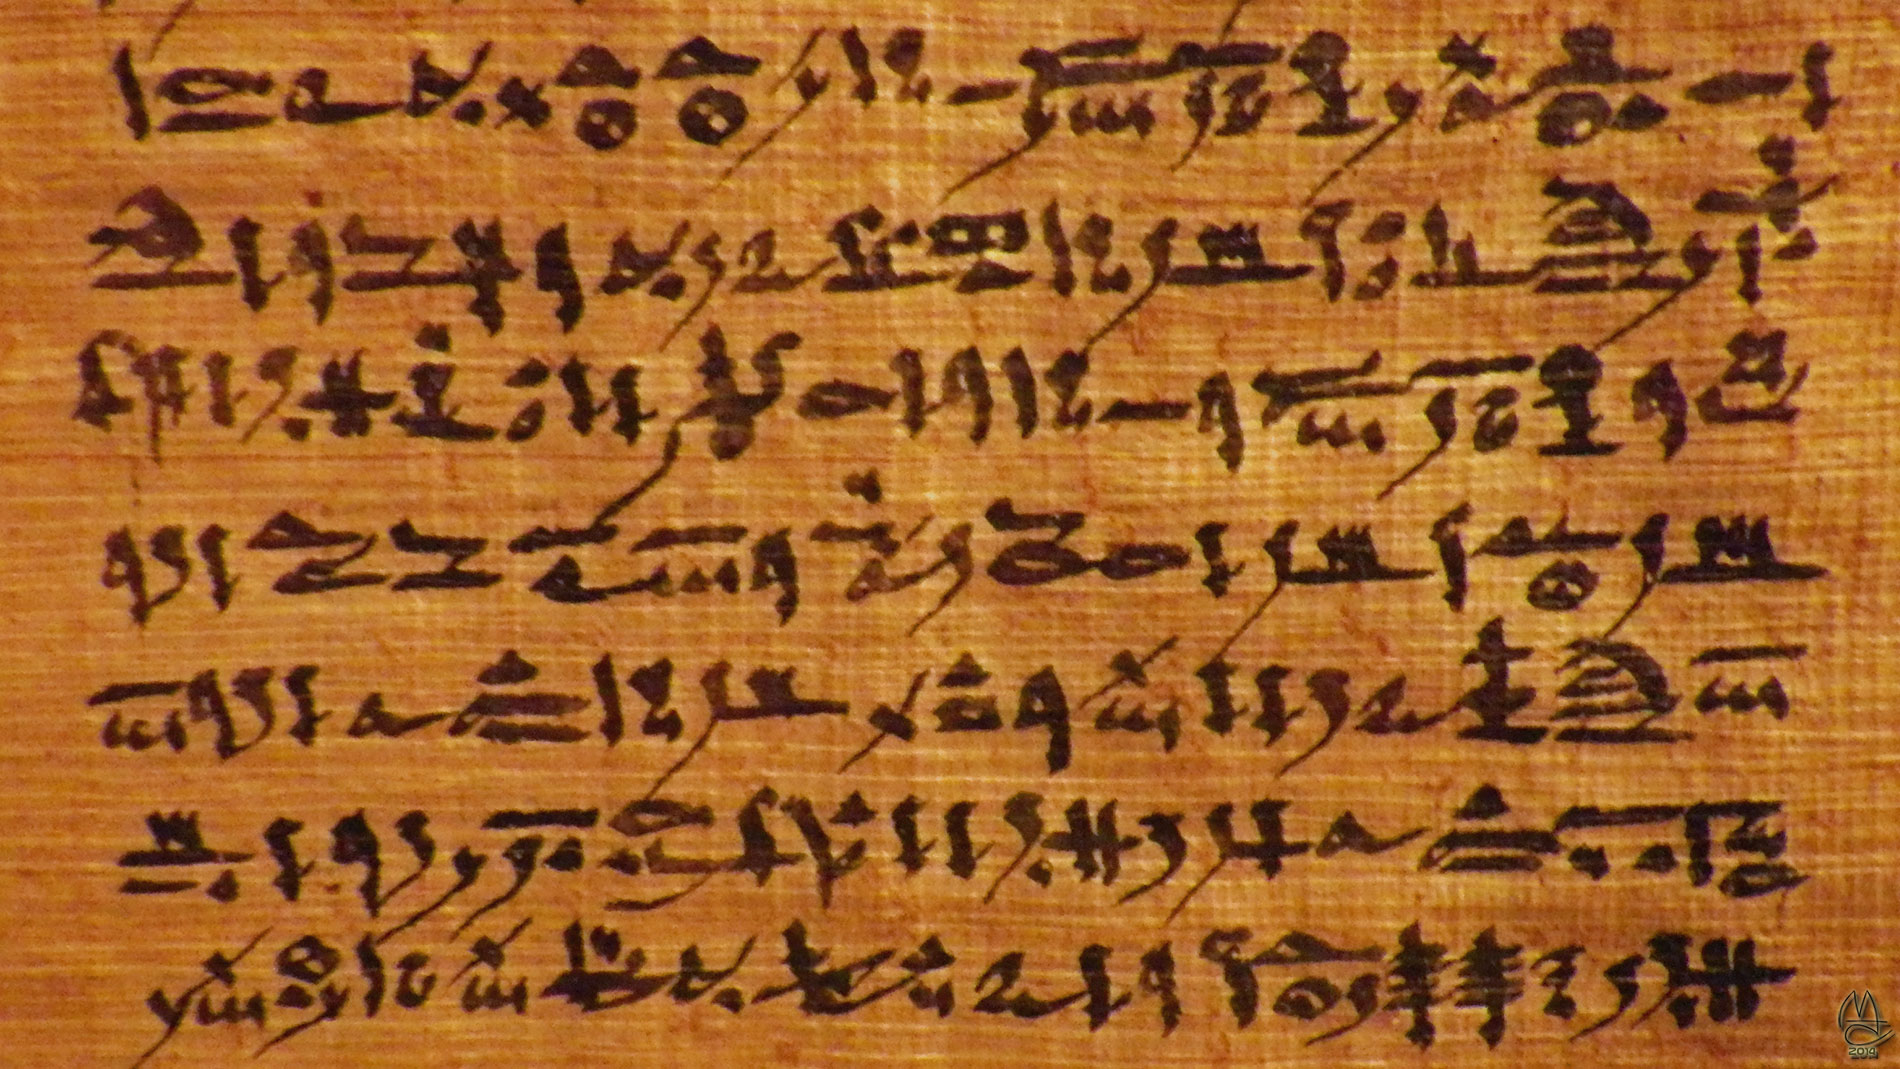 Book Of The Dead of Nes-Min.  200-300 BCE